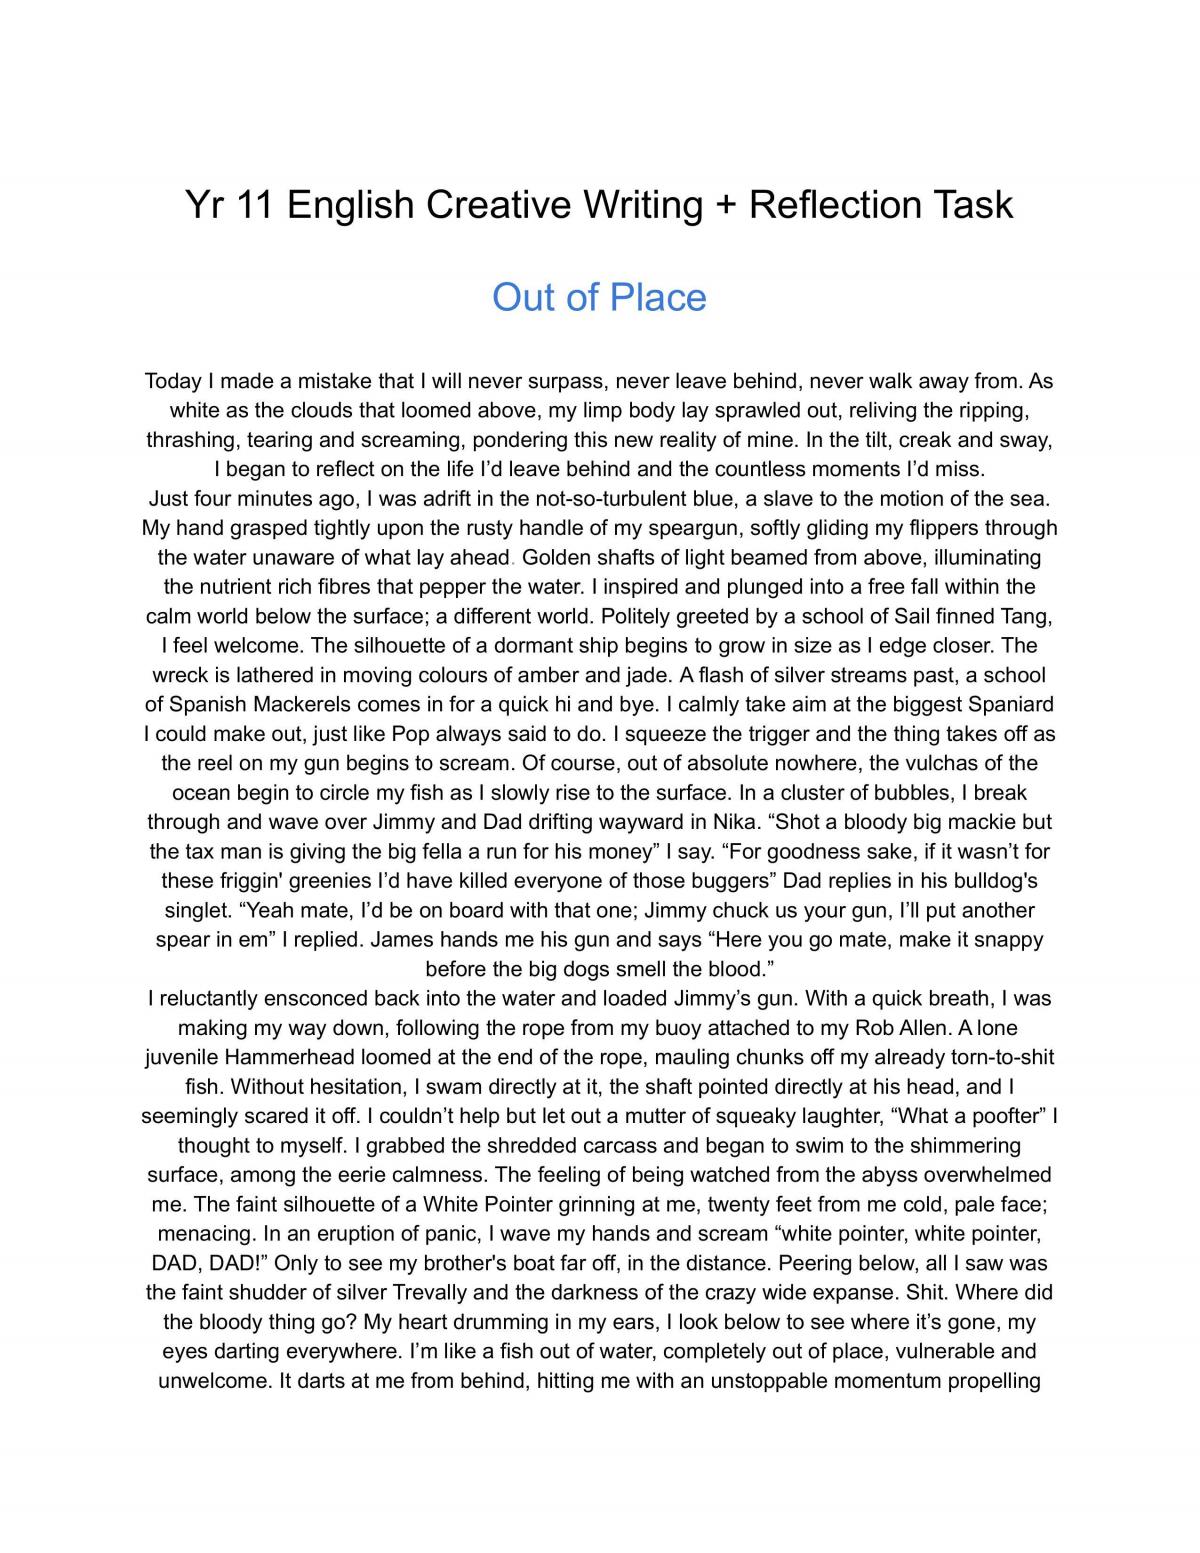 creative writing reflection examples